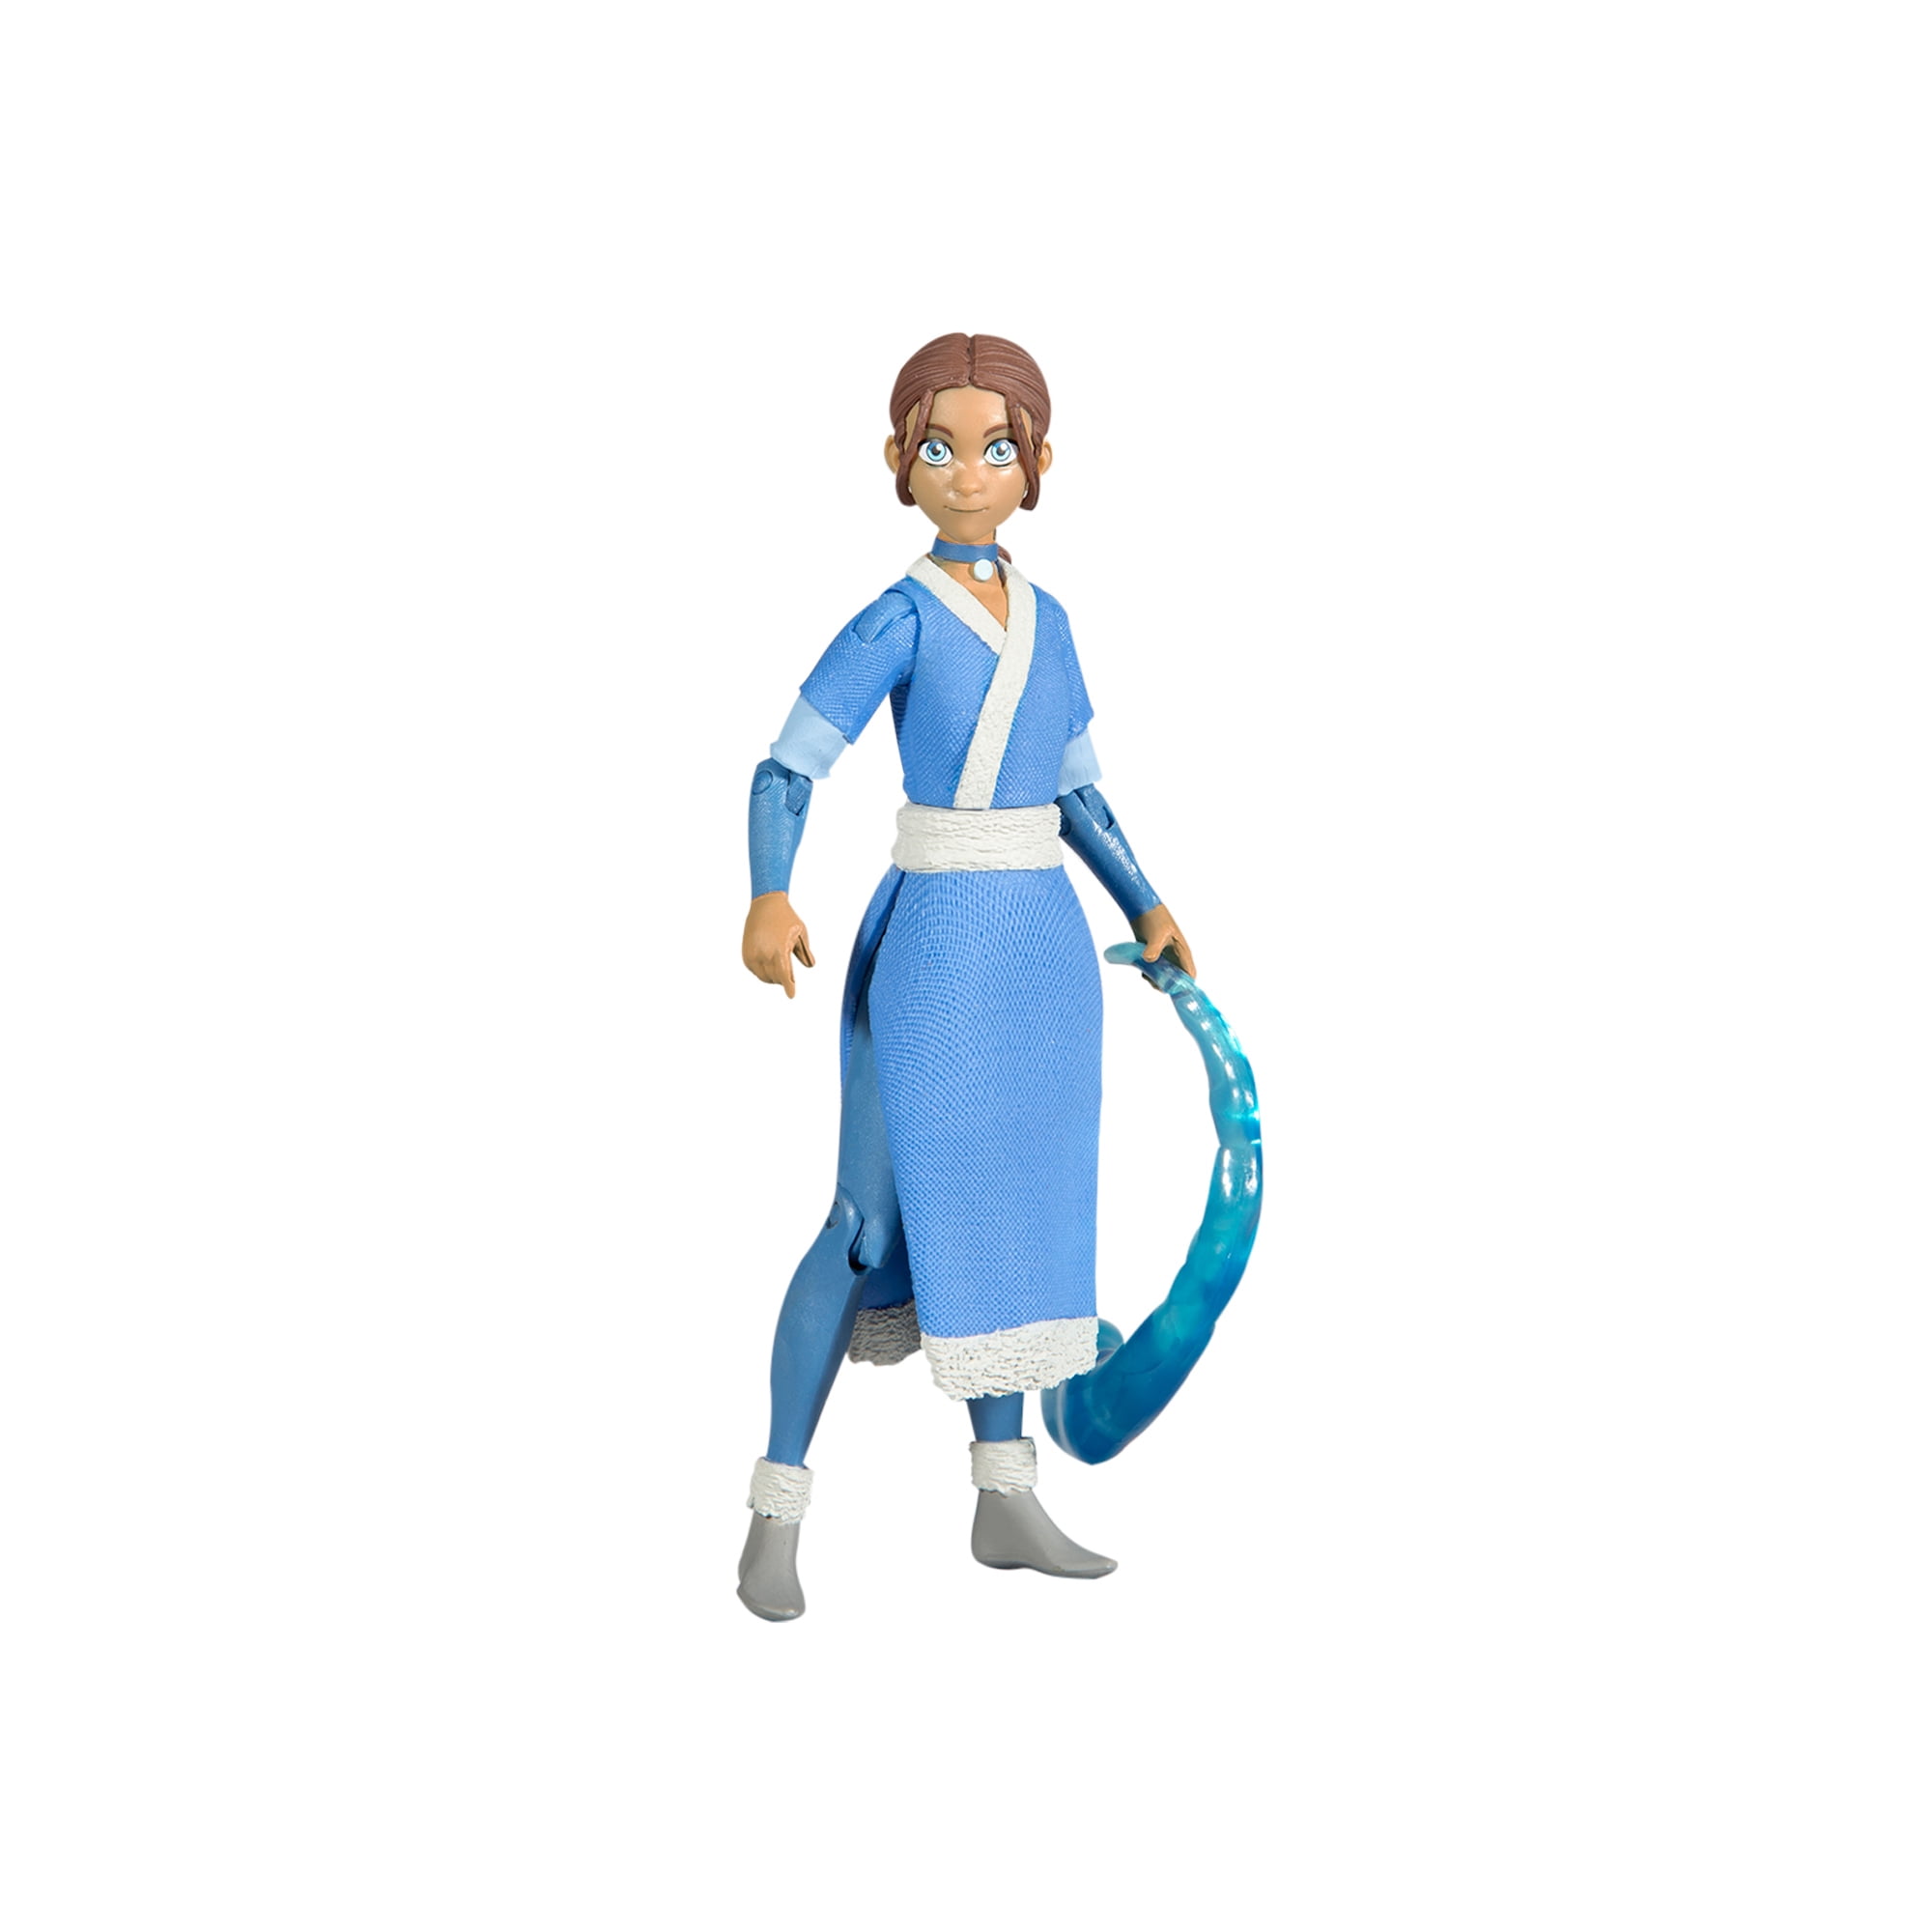 Avatar The Last Airbender McFarlane Toys Figures Wave 2 Are On Sale Now